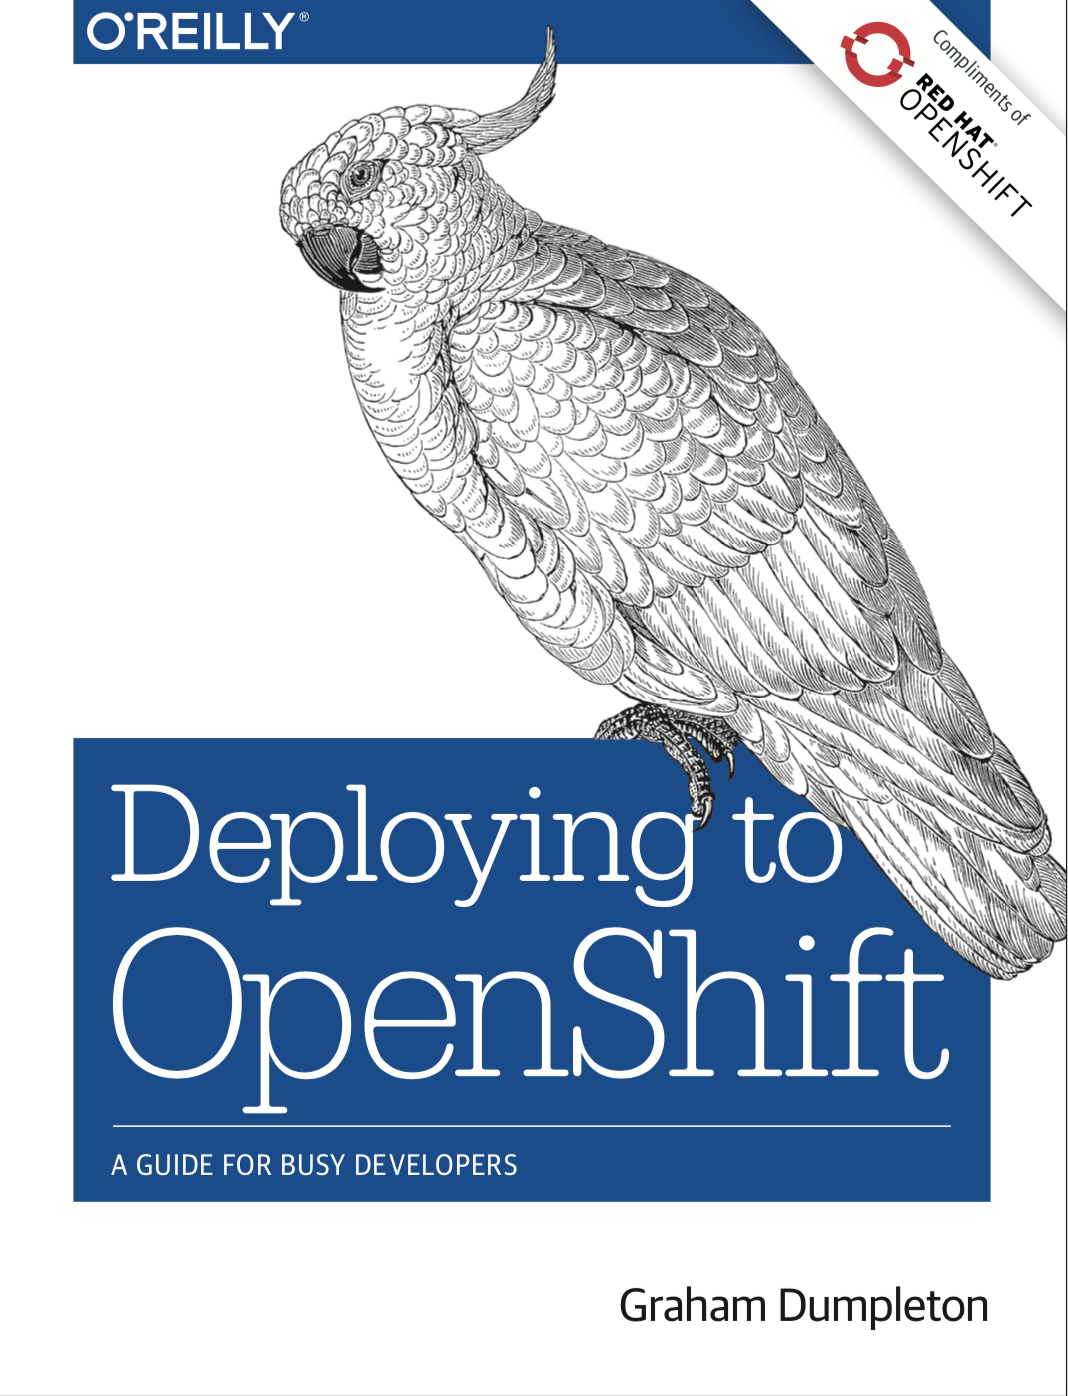 openshift book cover